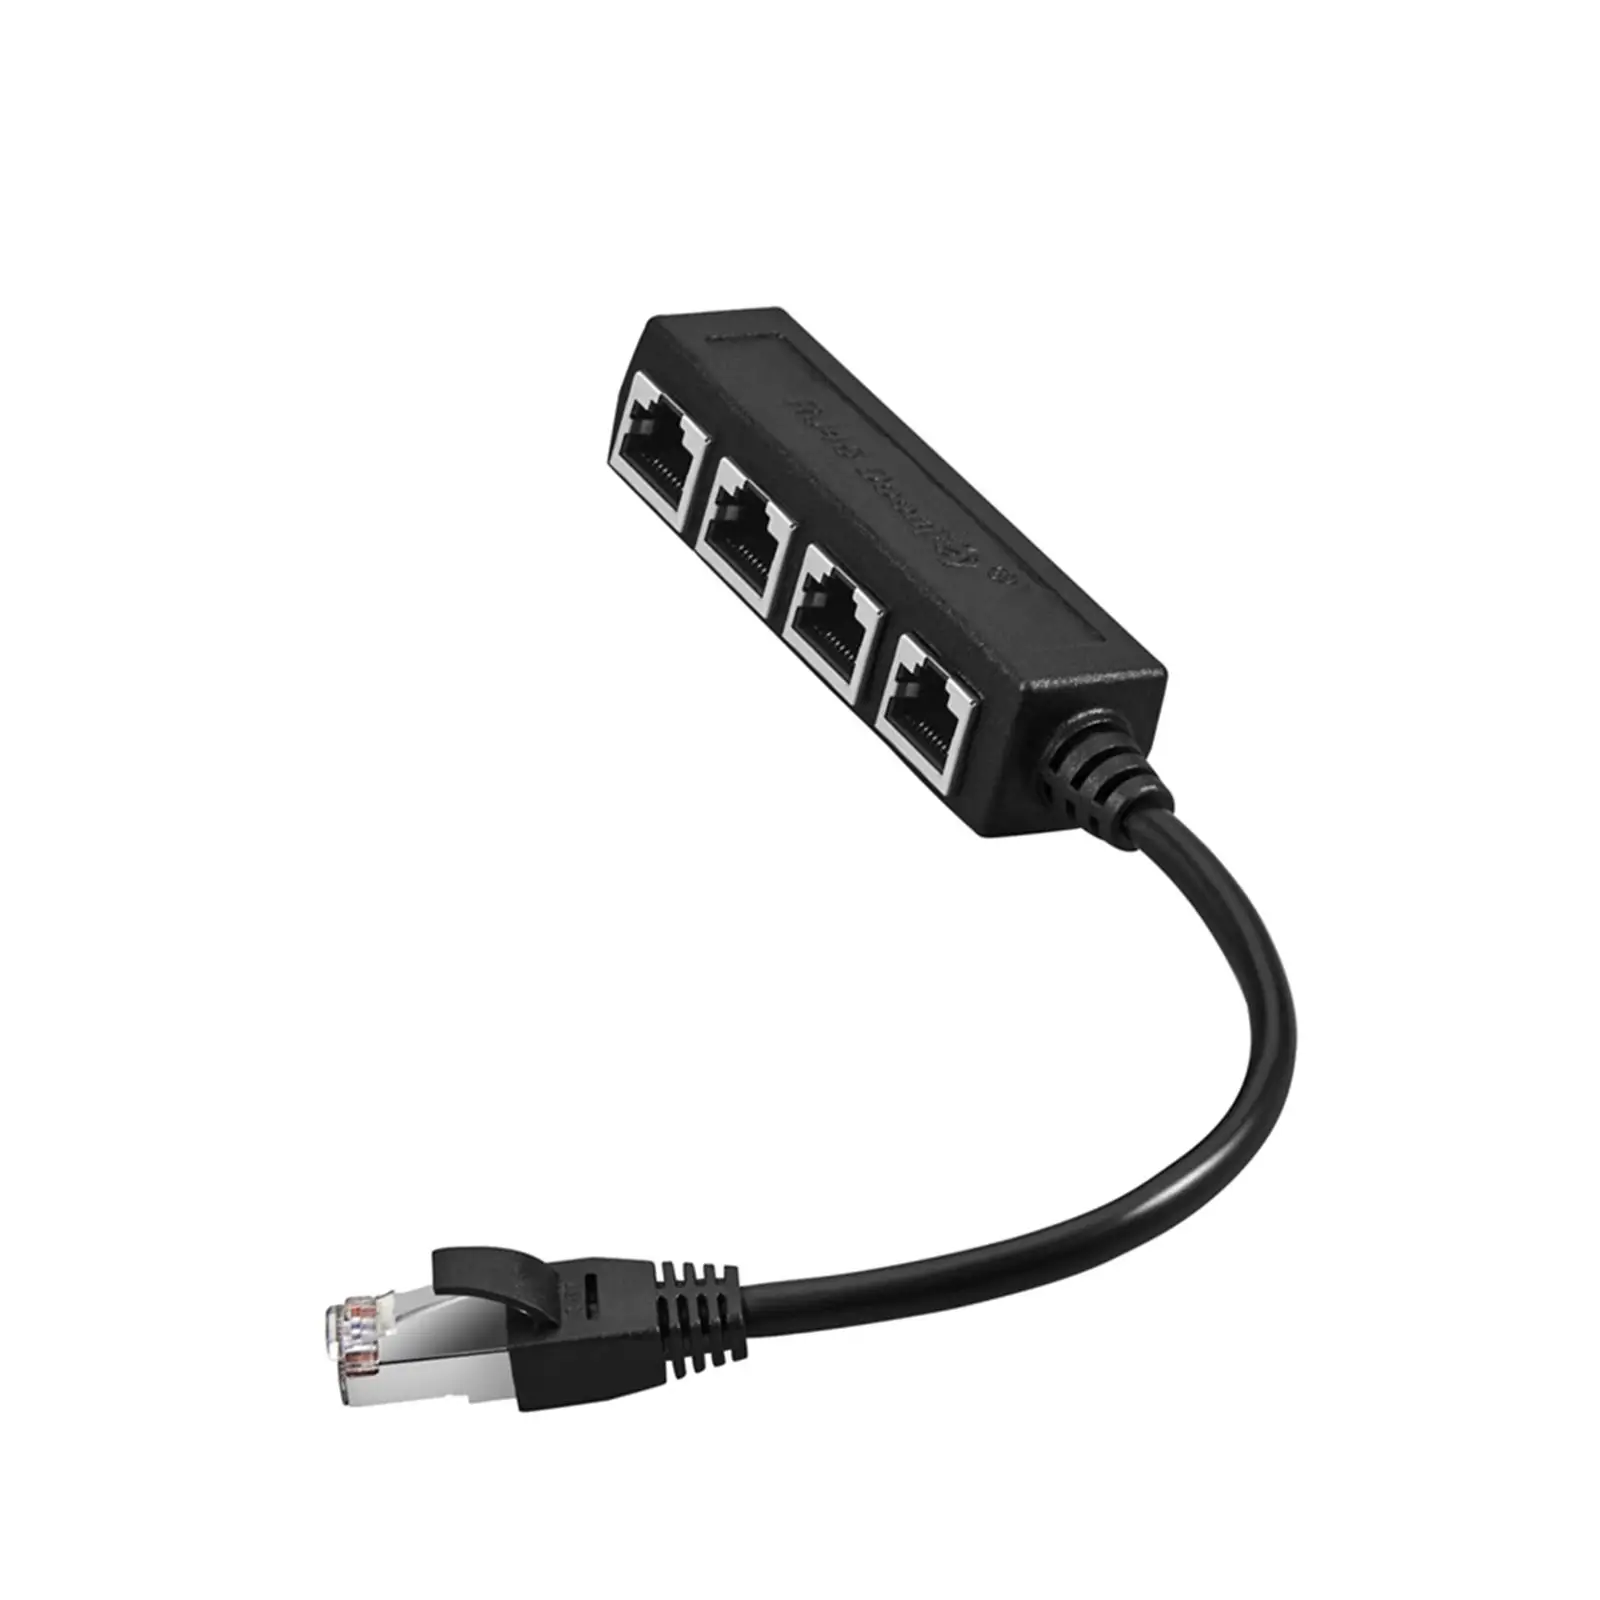 Ethernet Splitter 1 Male to 4x Female Plug and Play PVC 1 to 4 LAN Network Extension Cable Connector for Laptop Computer